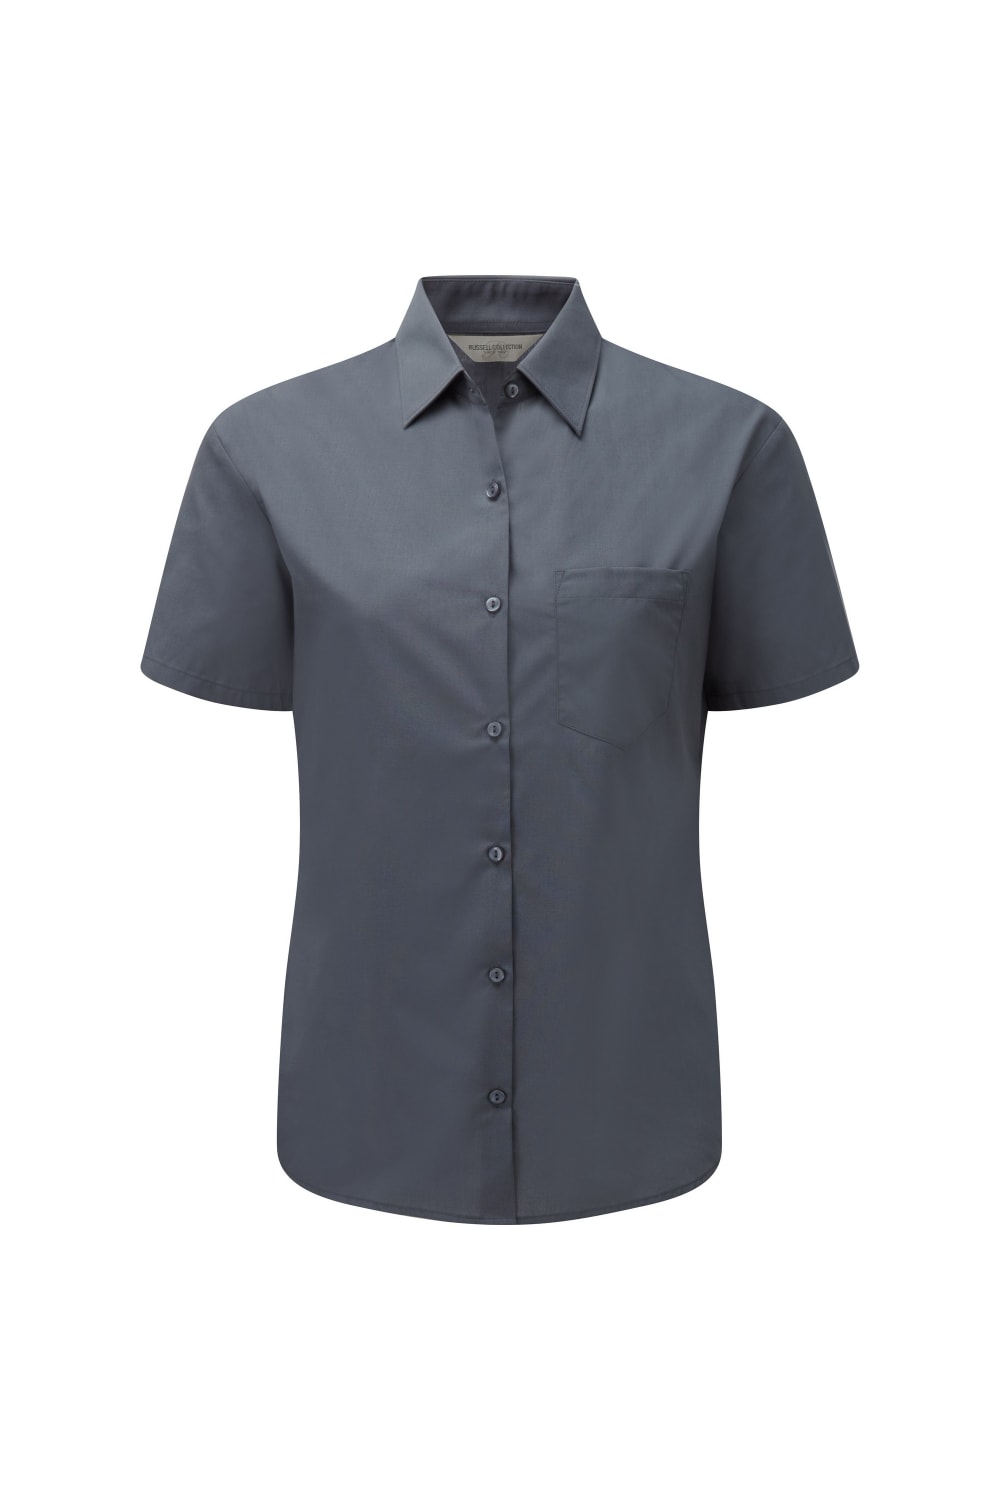 Russell Collection Ladies/Womens Short Sleeve Poly-Cotton Easy Care Poplin Shirt (Convoy Gray)